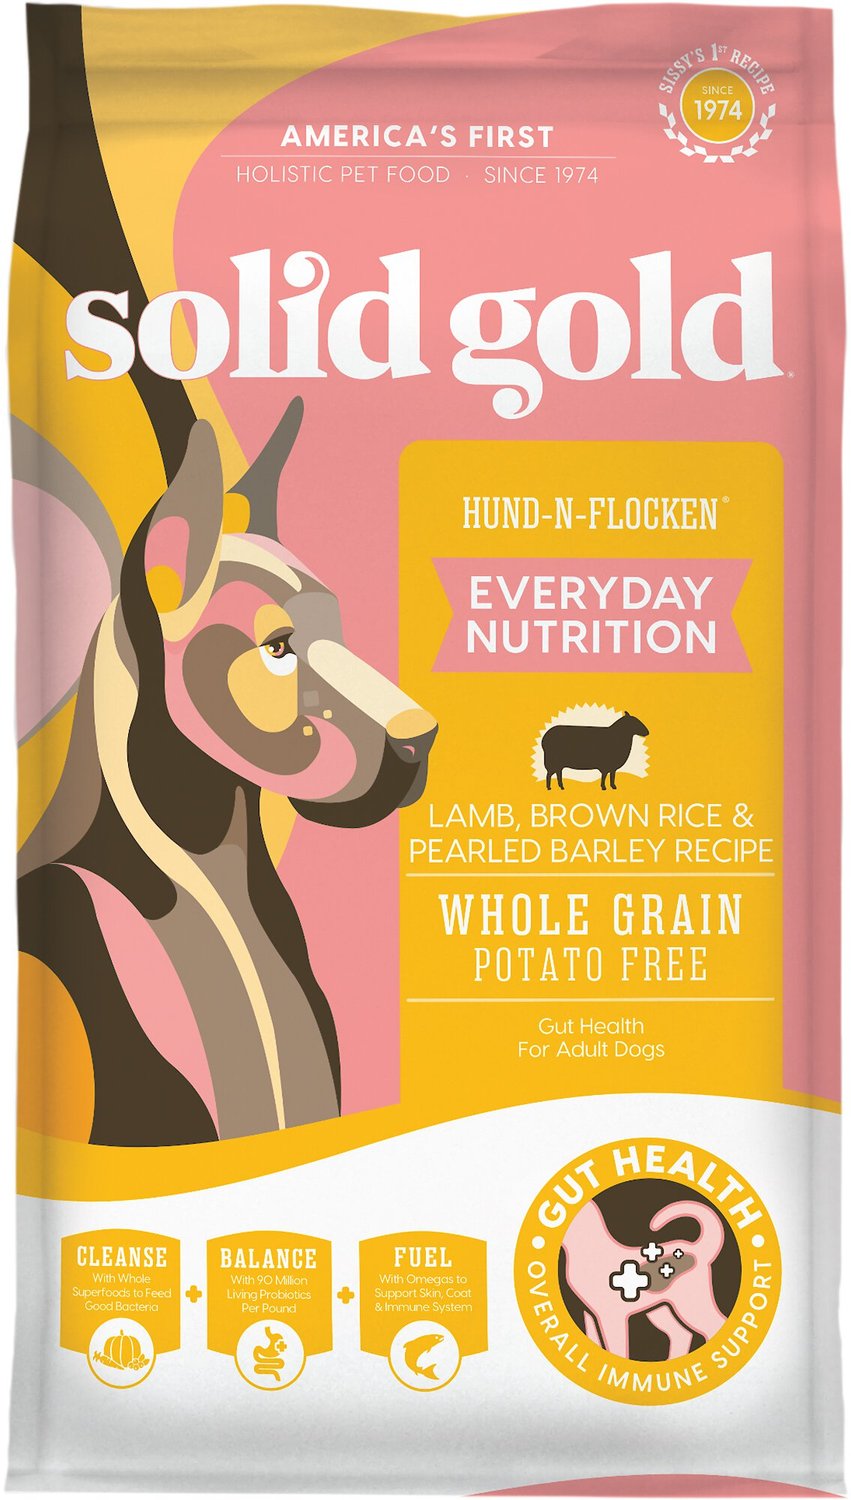 Solid Gold Hund-n-Flocken Lamb, Brown Rice & Pearled Barley Recipe Whole Grain Dry Food For Senior Dogs